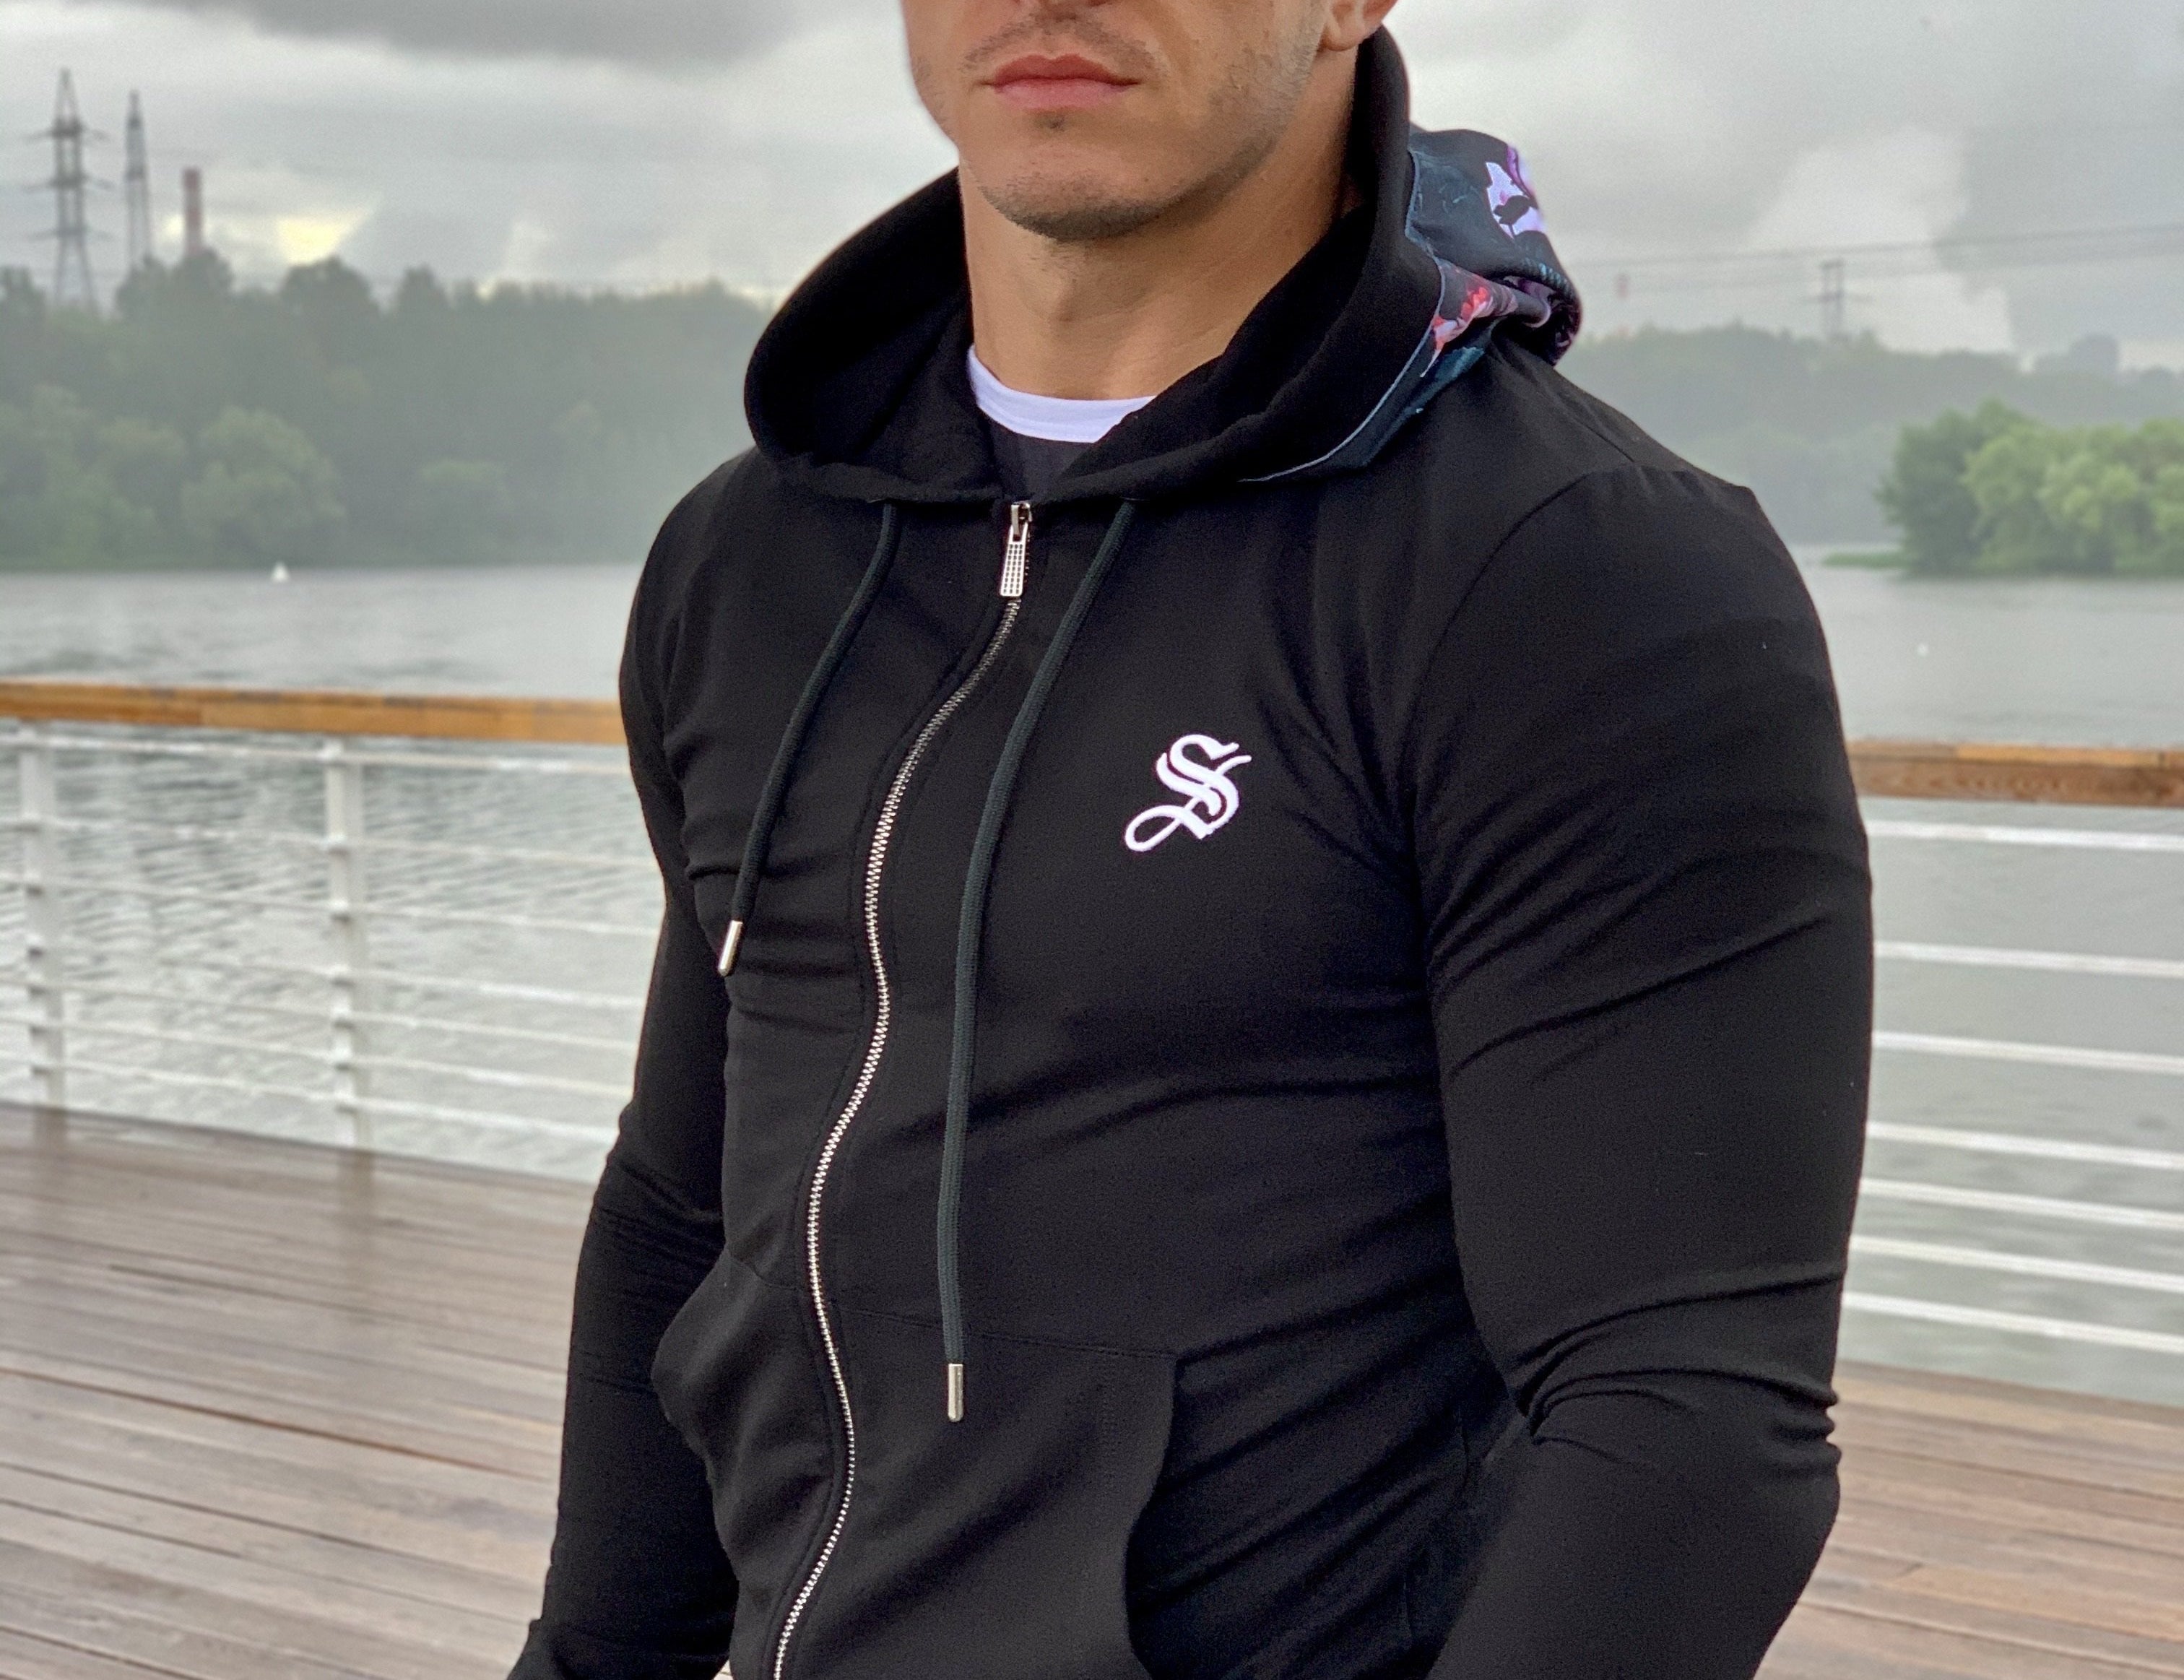 Fate - Black/Flowers Hoodie for Men (PRE-ORDER DISPATCH DATE 25 SEPTEMBER) - Sarman Fashion - Wholesale Clothing Fashion Brand for Men from Canada